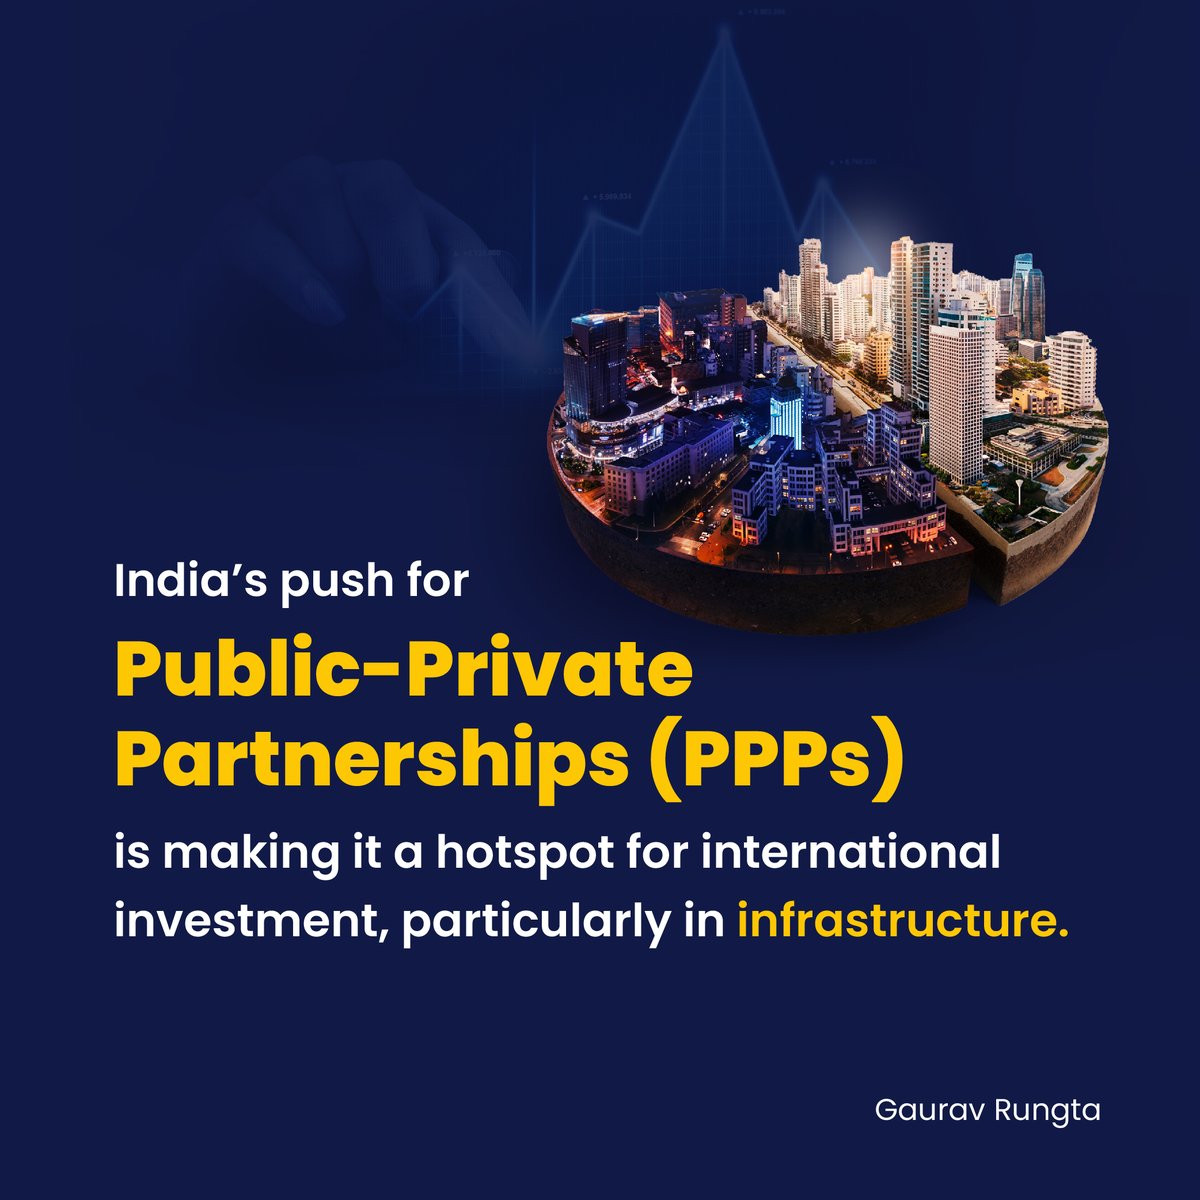 India's push for Public-Private Partnerships (PPPs) is making it a hotspot for international investment, particularly in infrastructure. This initiative is paving the way for foreign companies to bring in capital, enhancing growth and development. bit.ly/3Uo13wj